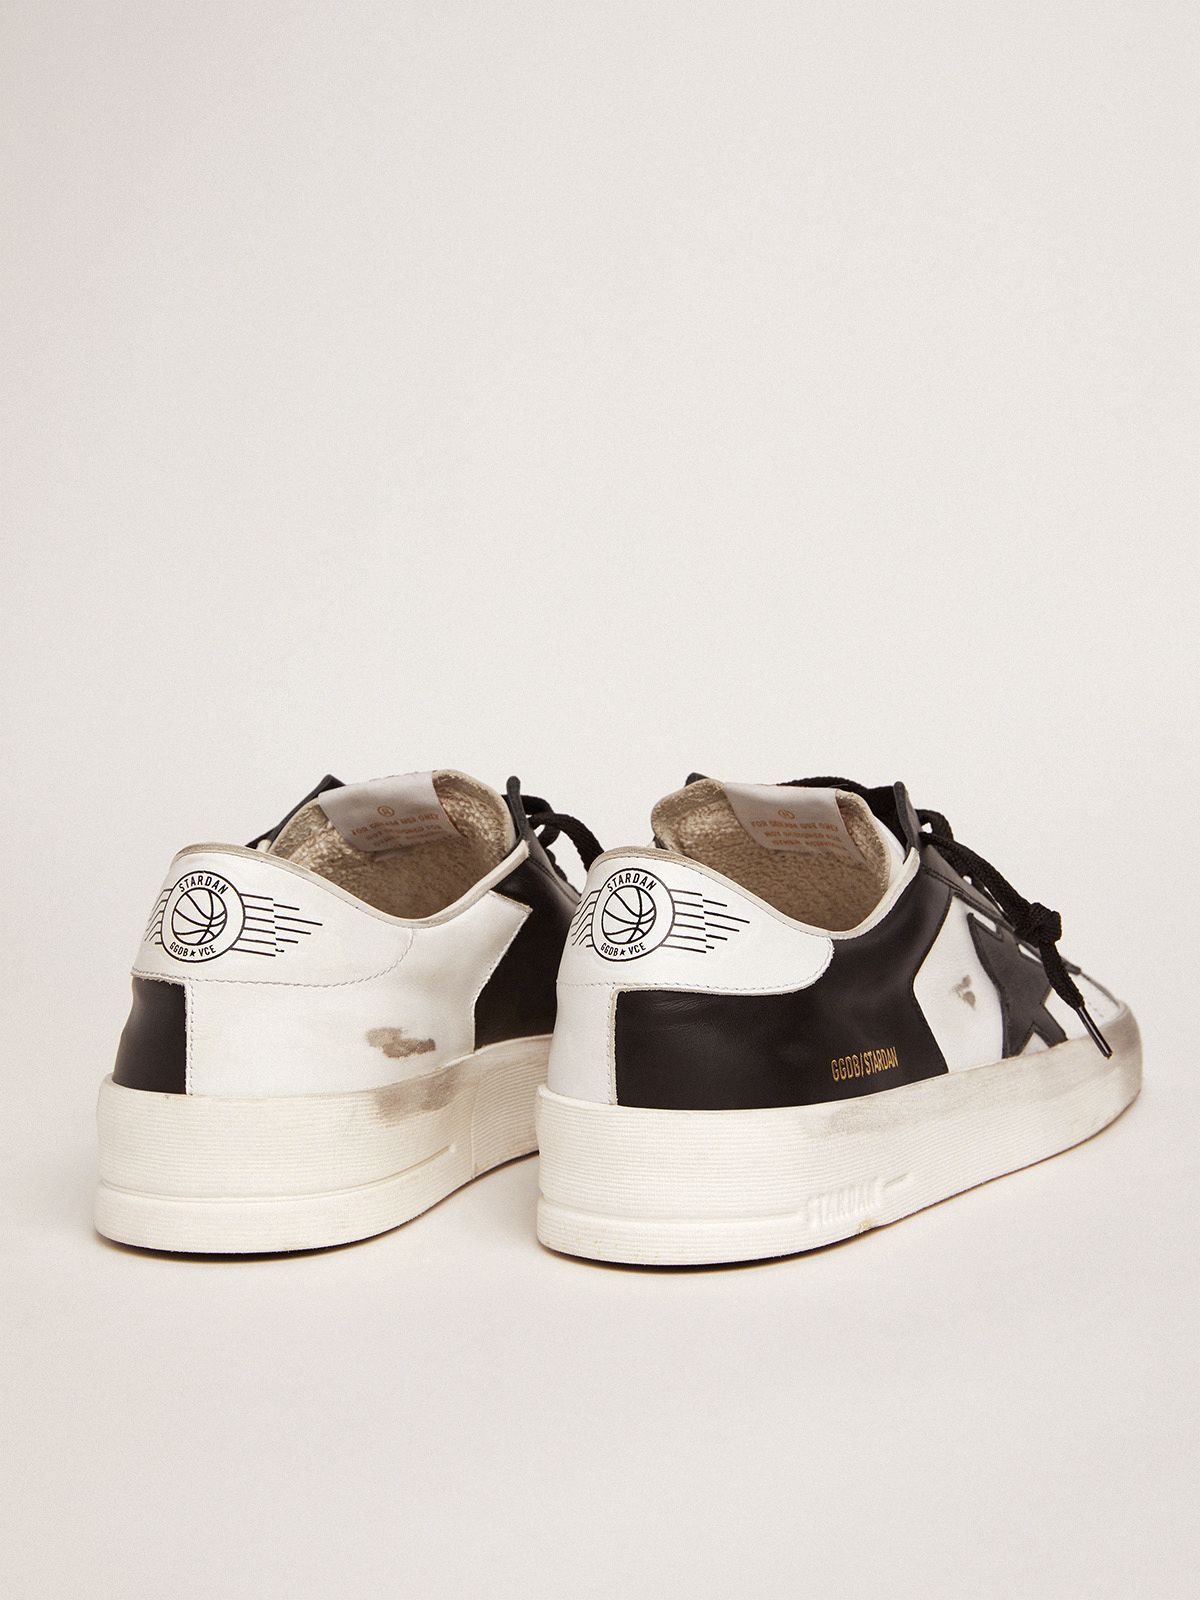 Men's Stardan sneakers in black and white leather | Golden Goose